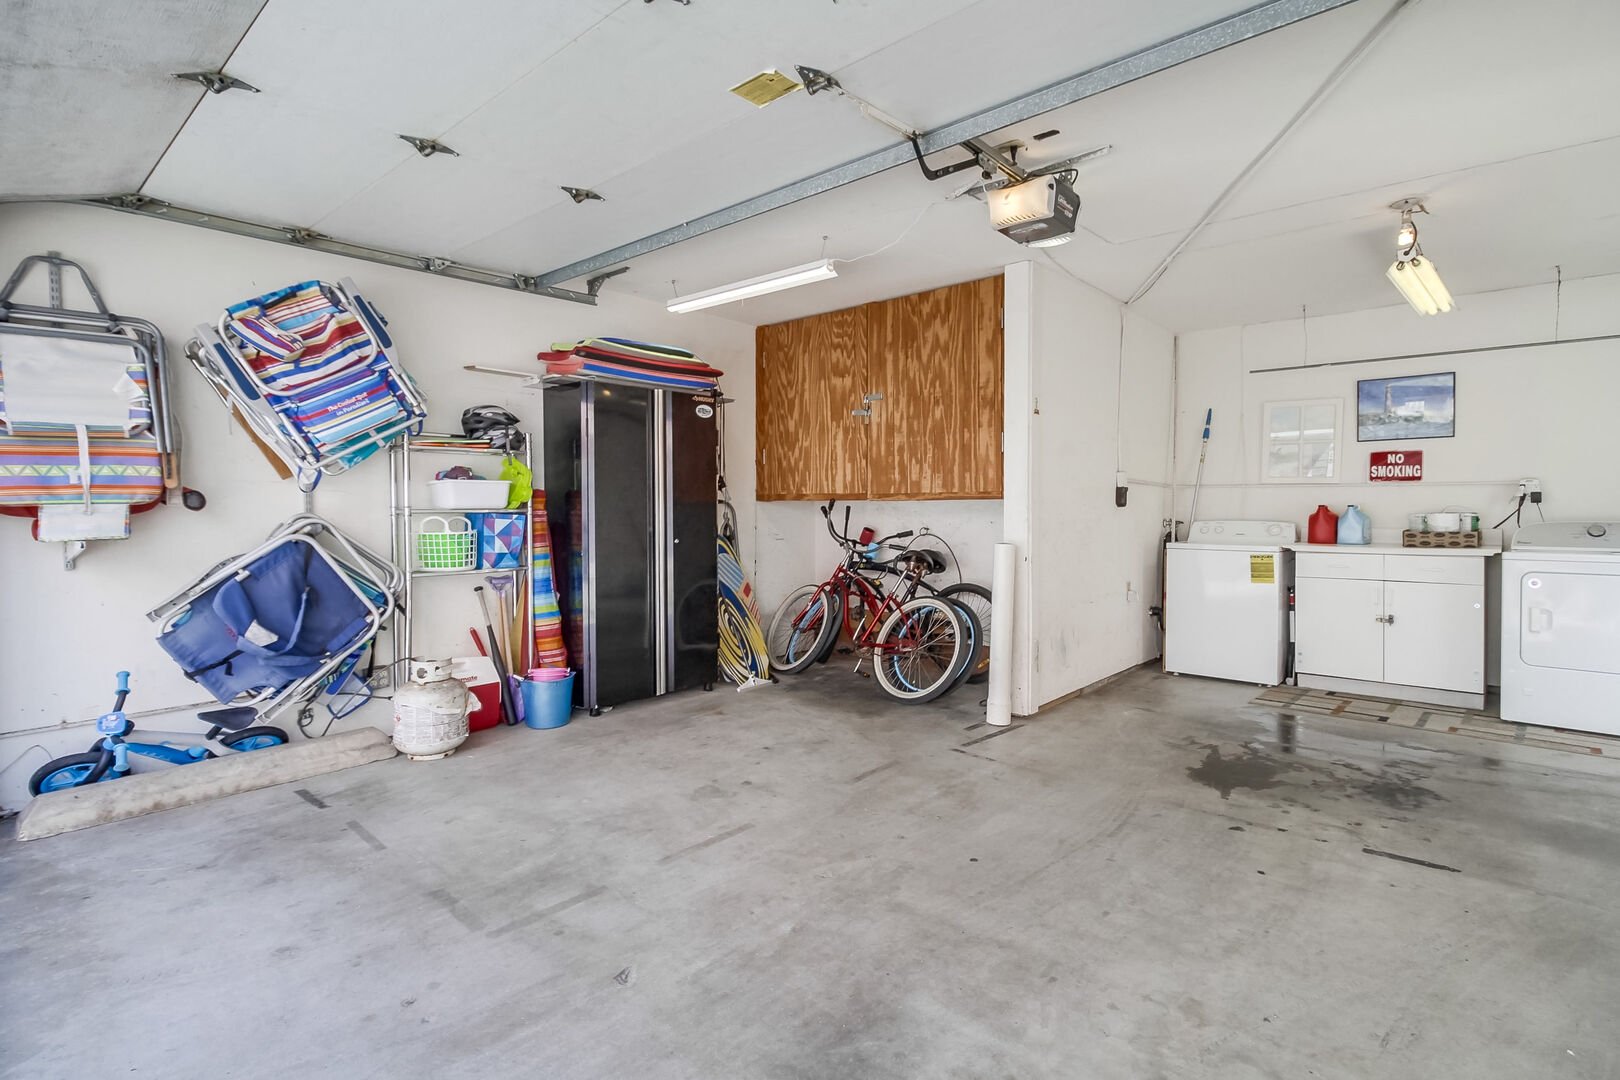 Garage parking for 2 SMALL cars with washer and dryer and beach accessories including chairs, boogie boards and beach umbrella. Bikes and extra propane also provided. 1 LARGE VEHICLE FITS COMFORTABLY